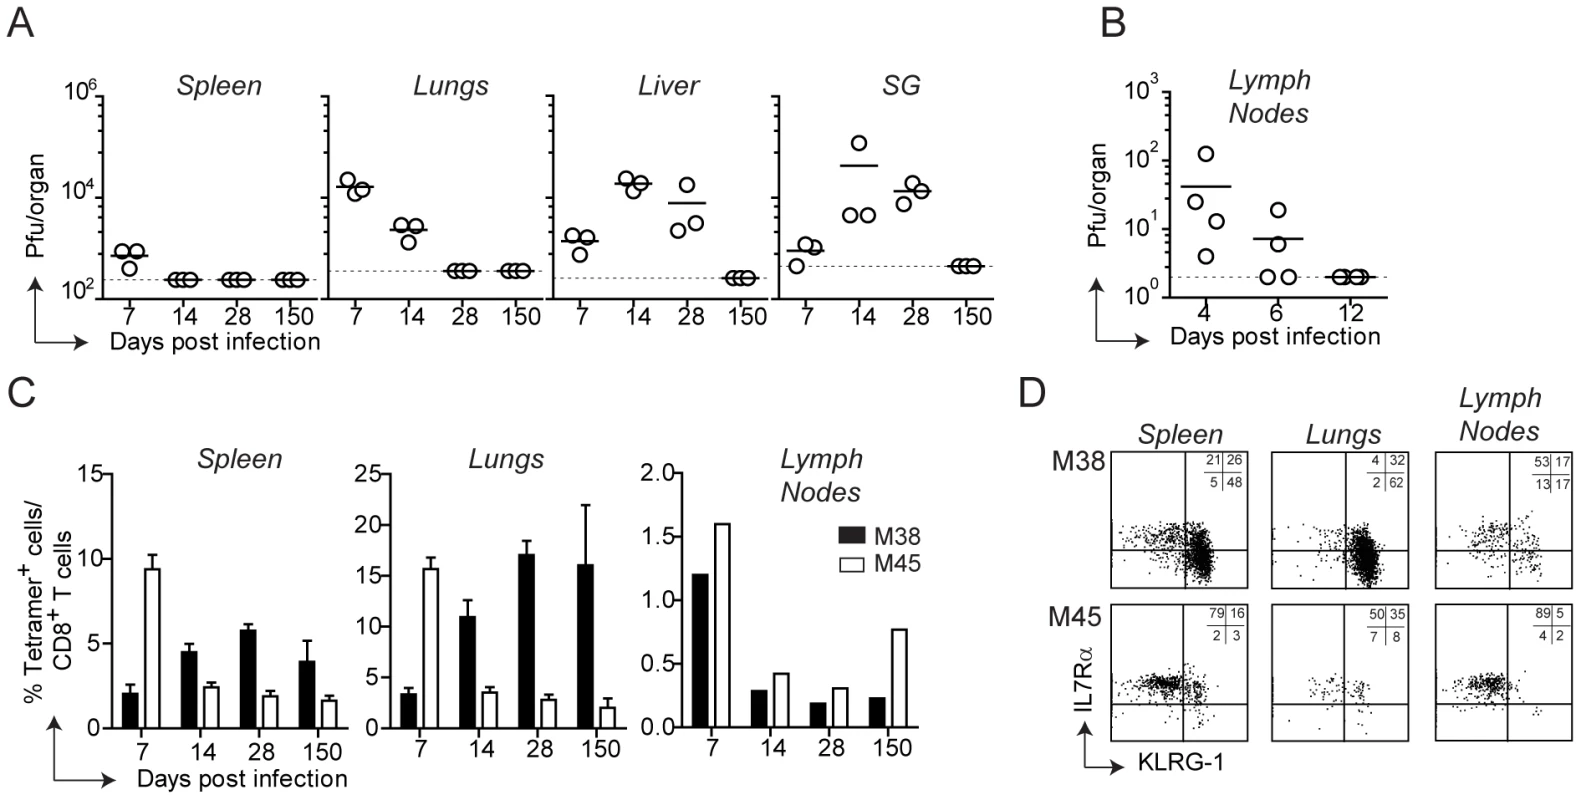 Tissue-specific pattern of MCMV-specific CD8 T cell responses.